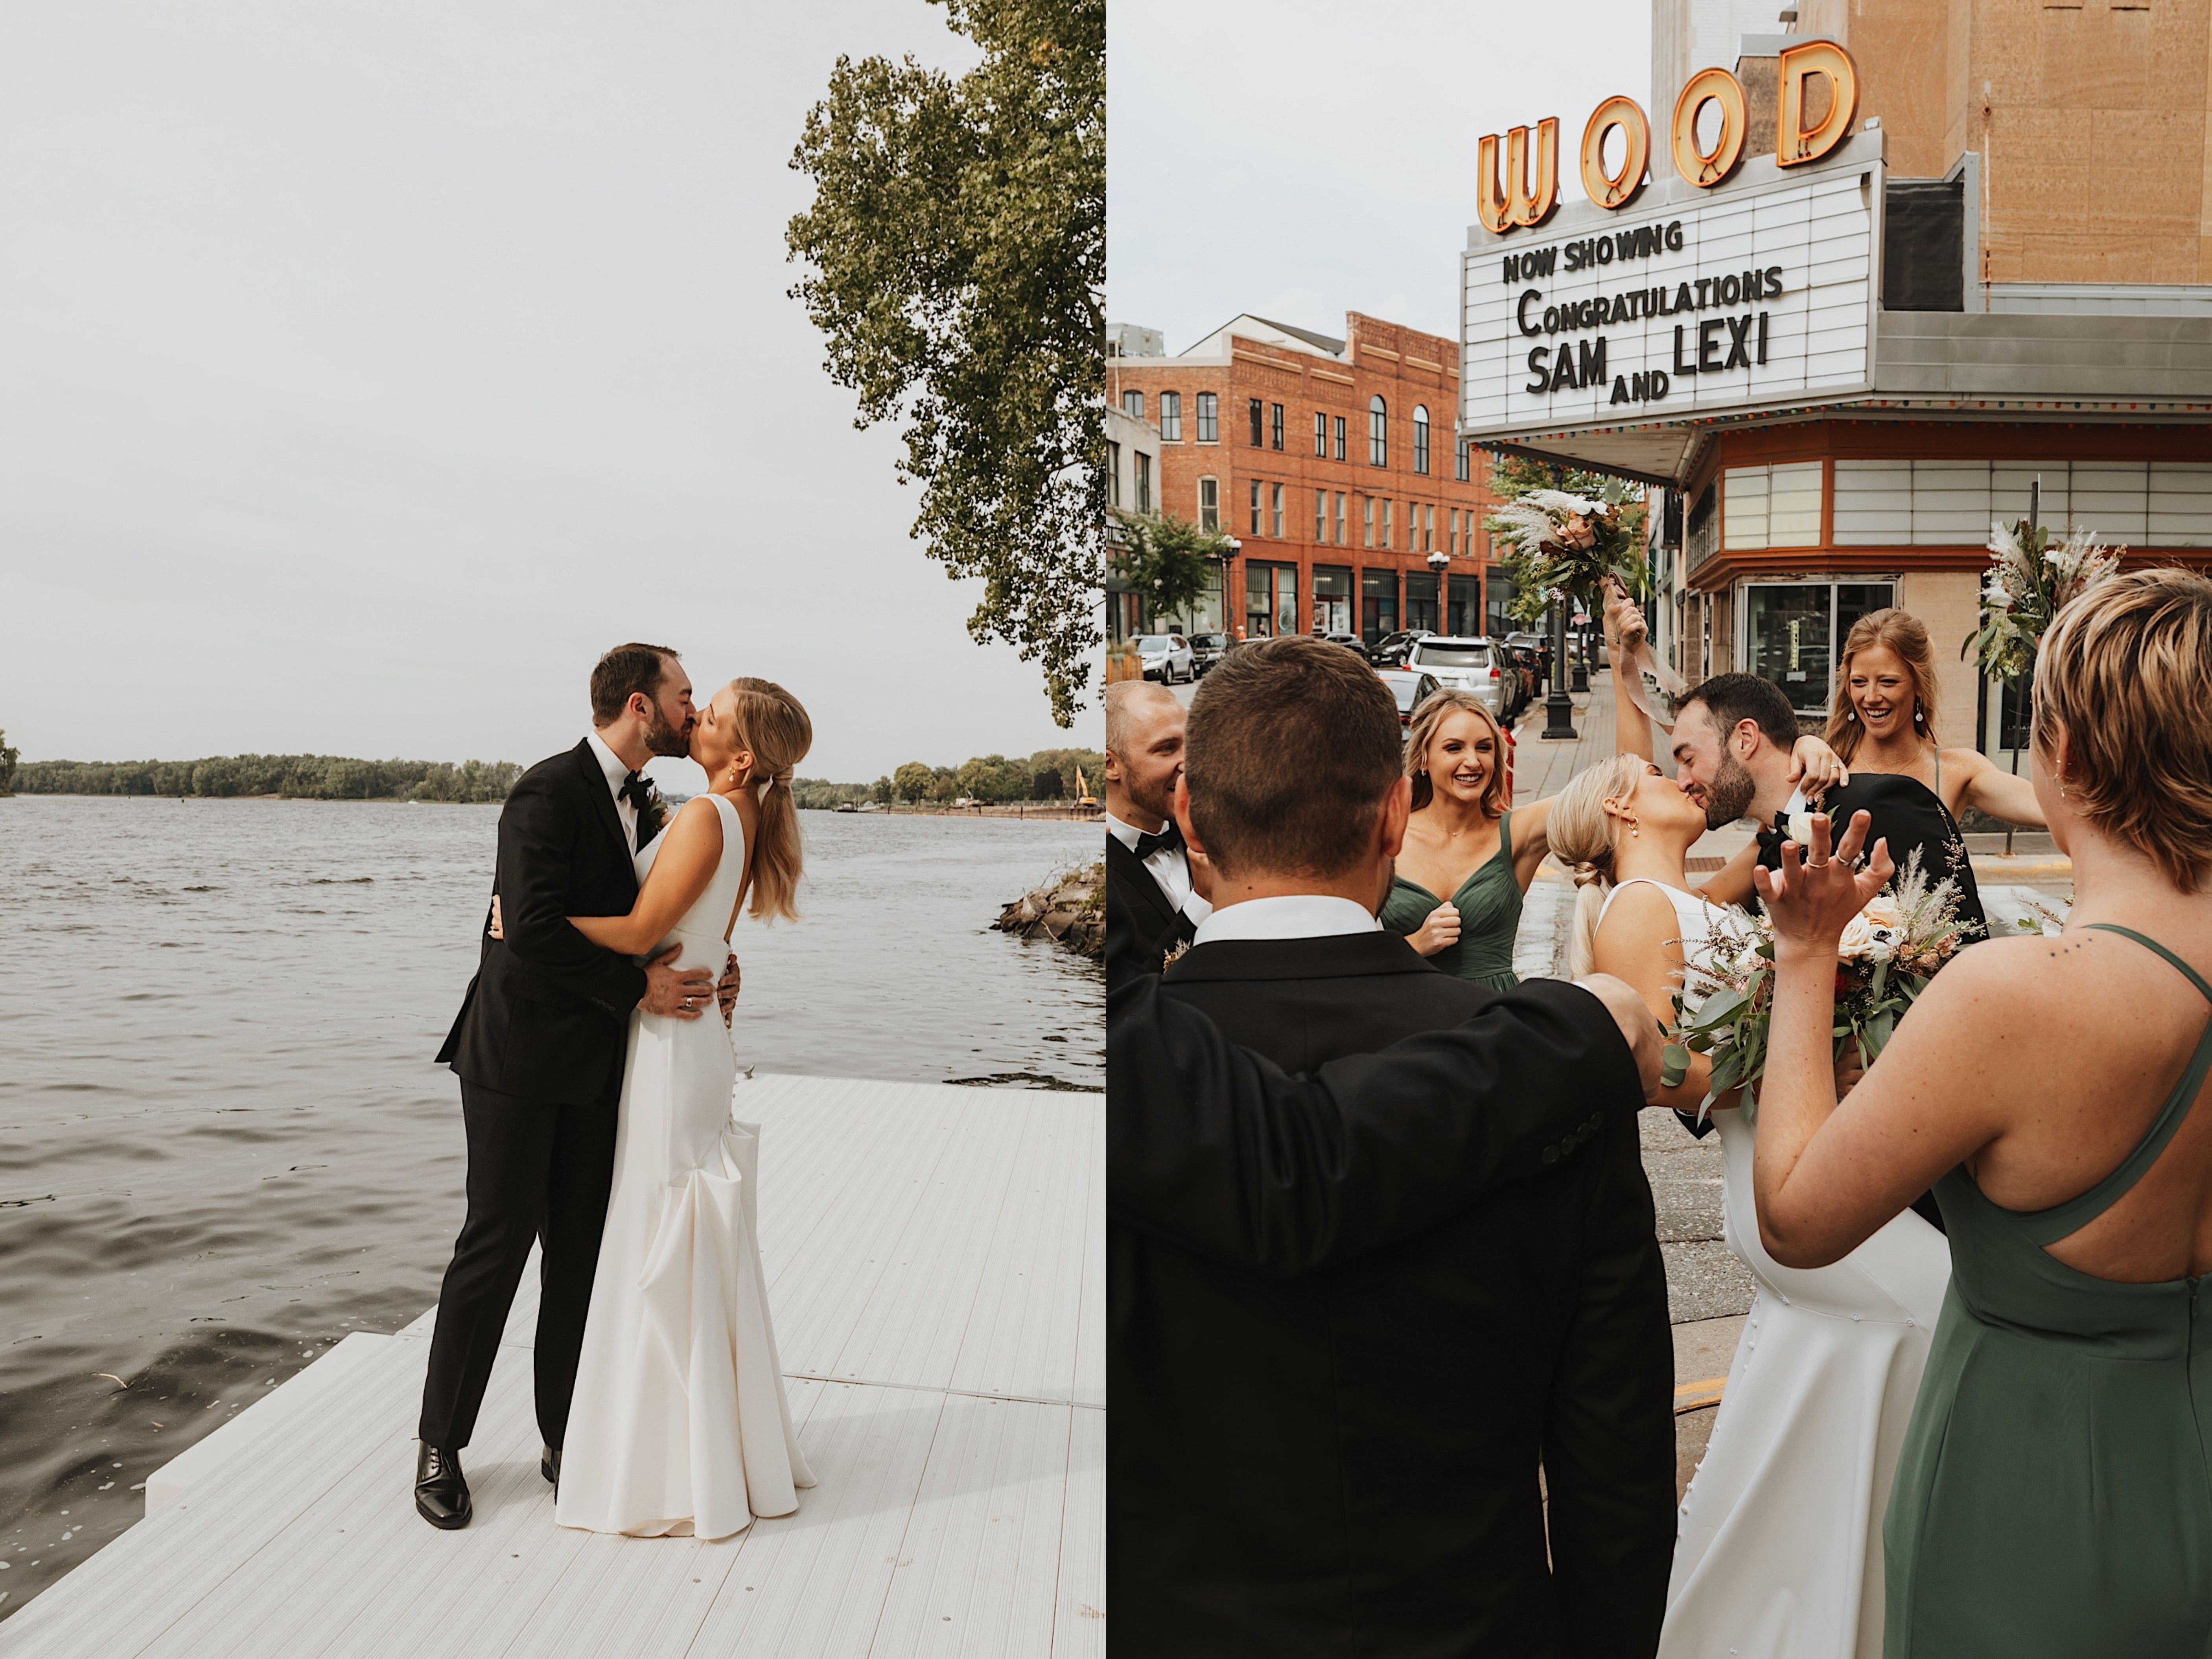 2 side by side photos, on the left a bride and groom kiss on a dock surrounded by water, the right photo is of them kissing in downtown La Crosse with their wedding party around them